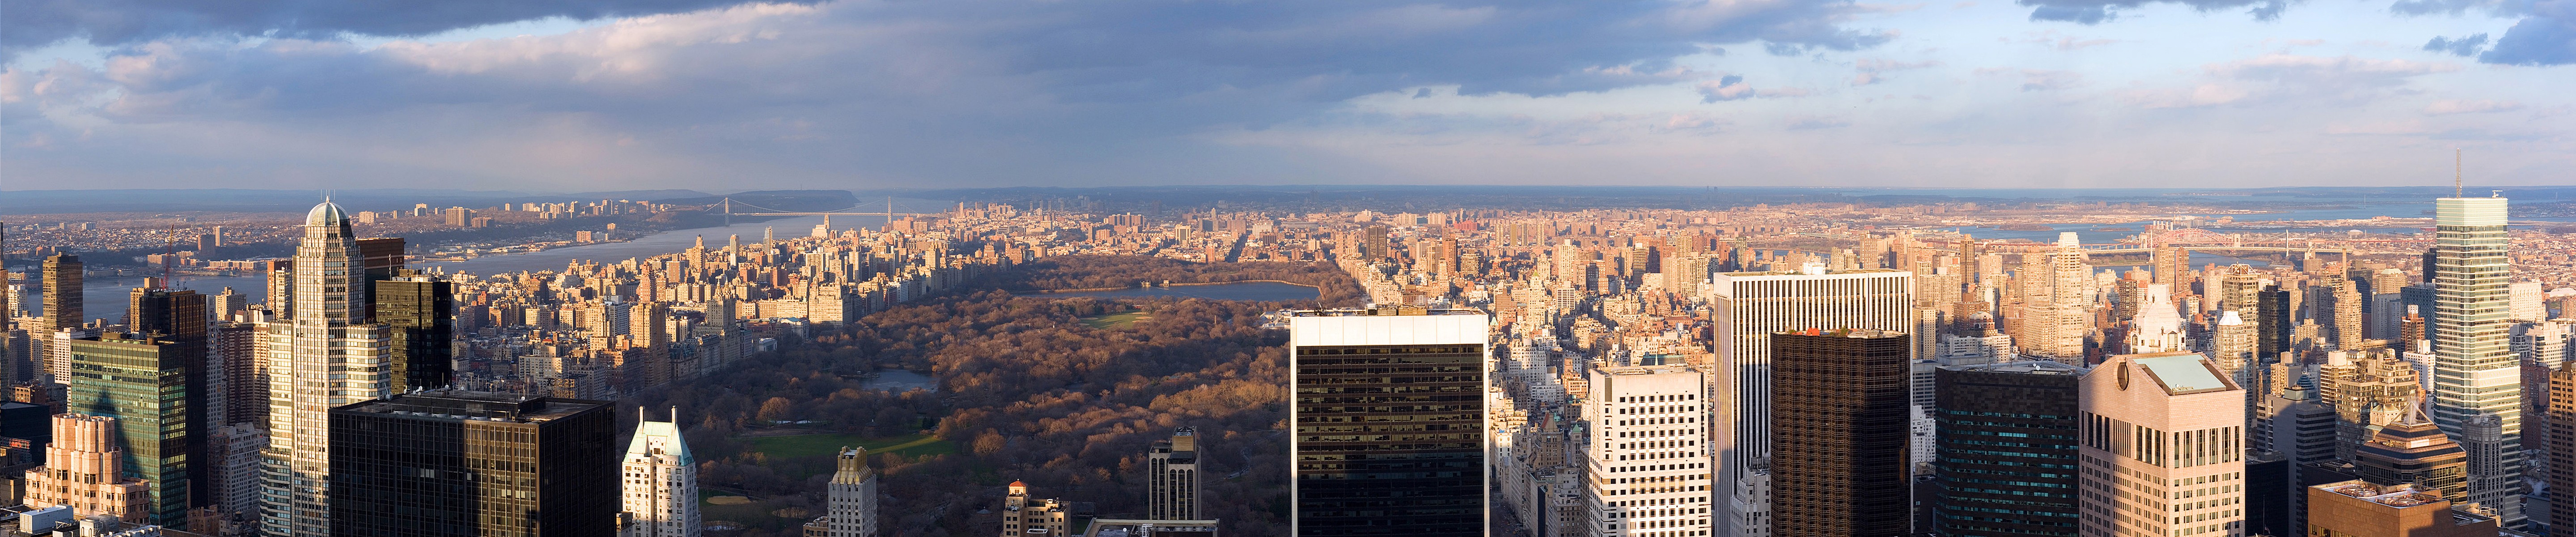 General 5760x1200 New York City triple screen Central Park wide angle cityscape Manhattan USA panorama